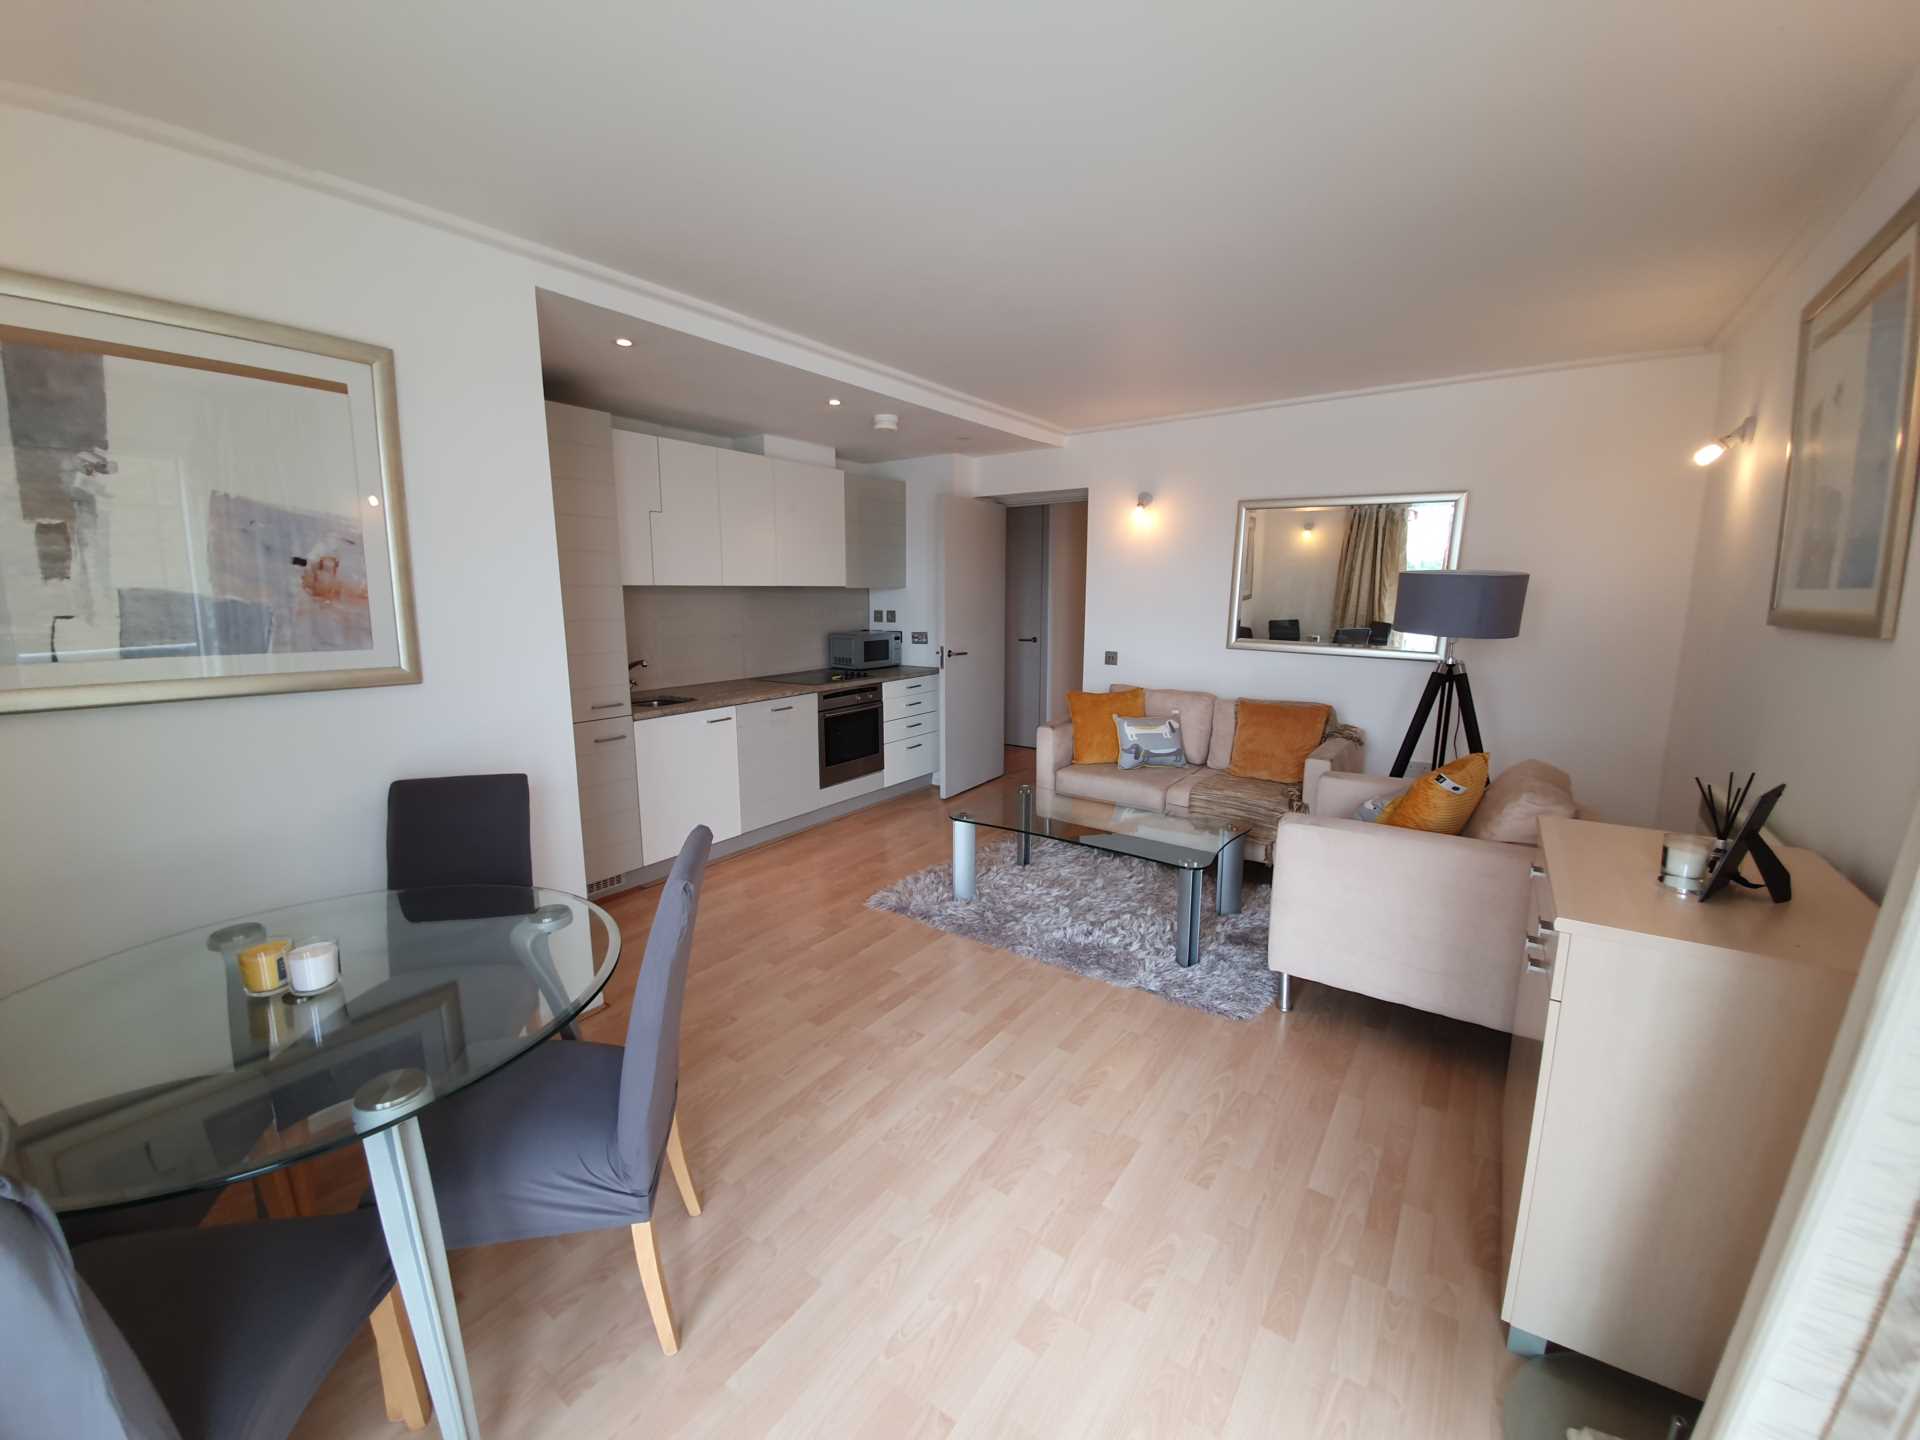 5th Floor, luxury one bedroom in Seacon Tower, E14 8JX, Image 5